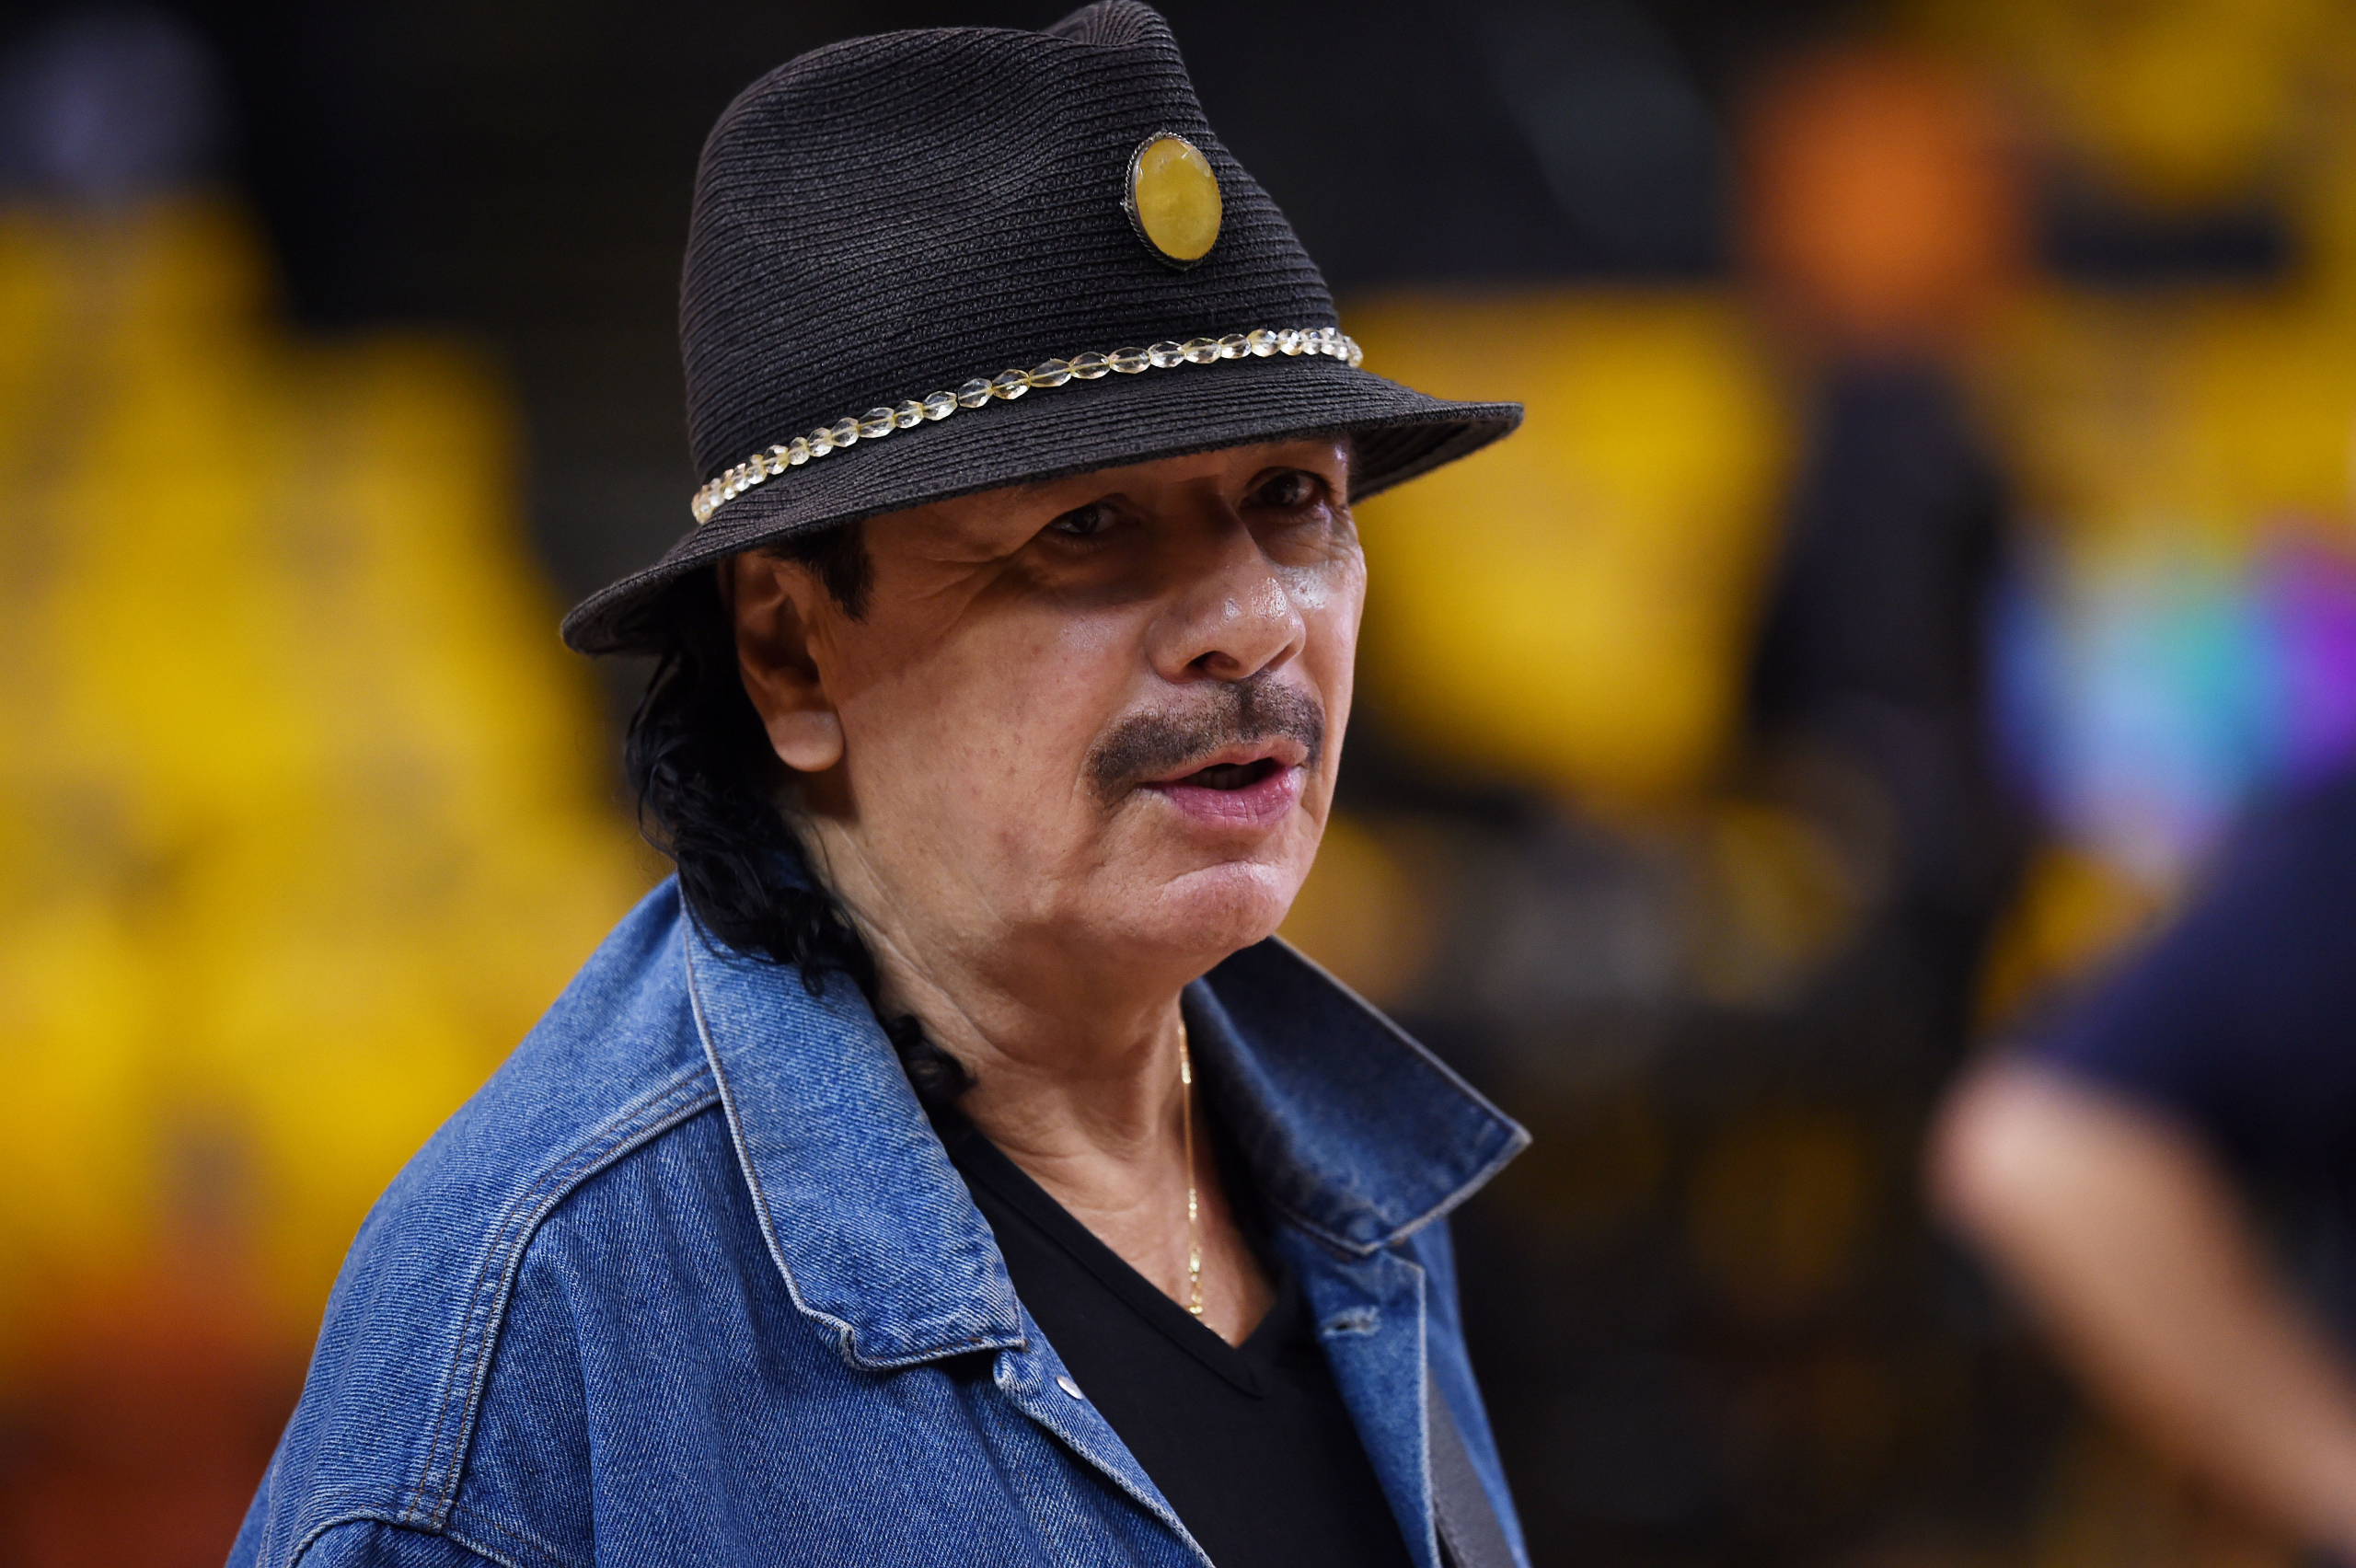 Carlos Santana ‘doing well’ after collapsing onstage in Michigan